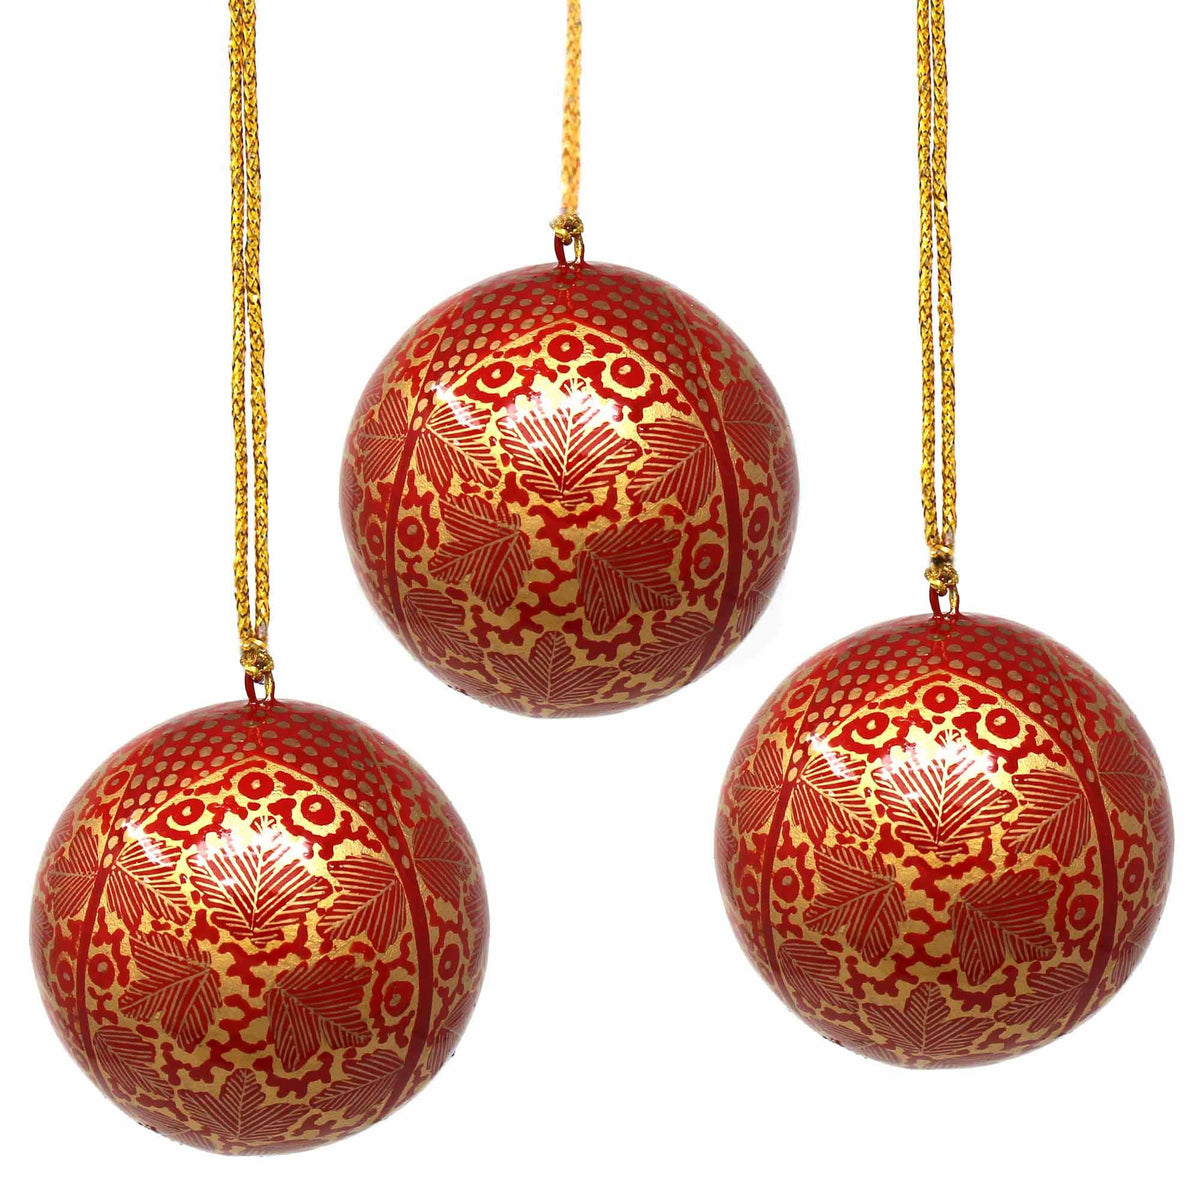 Handpainted Ornaments, Gold Chinar Leaves - Pack of 3 - Flyclothing LLC